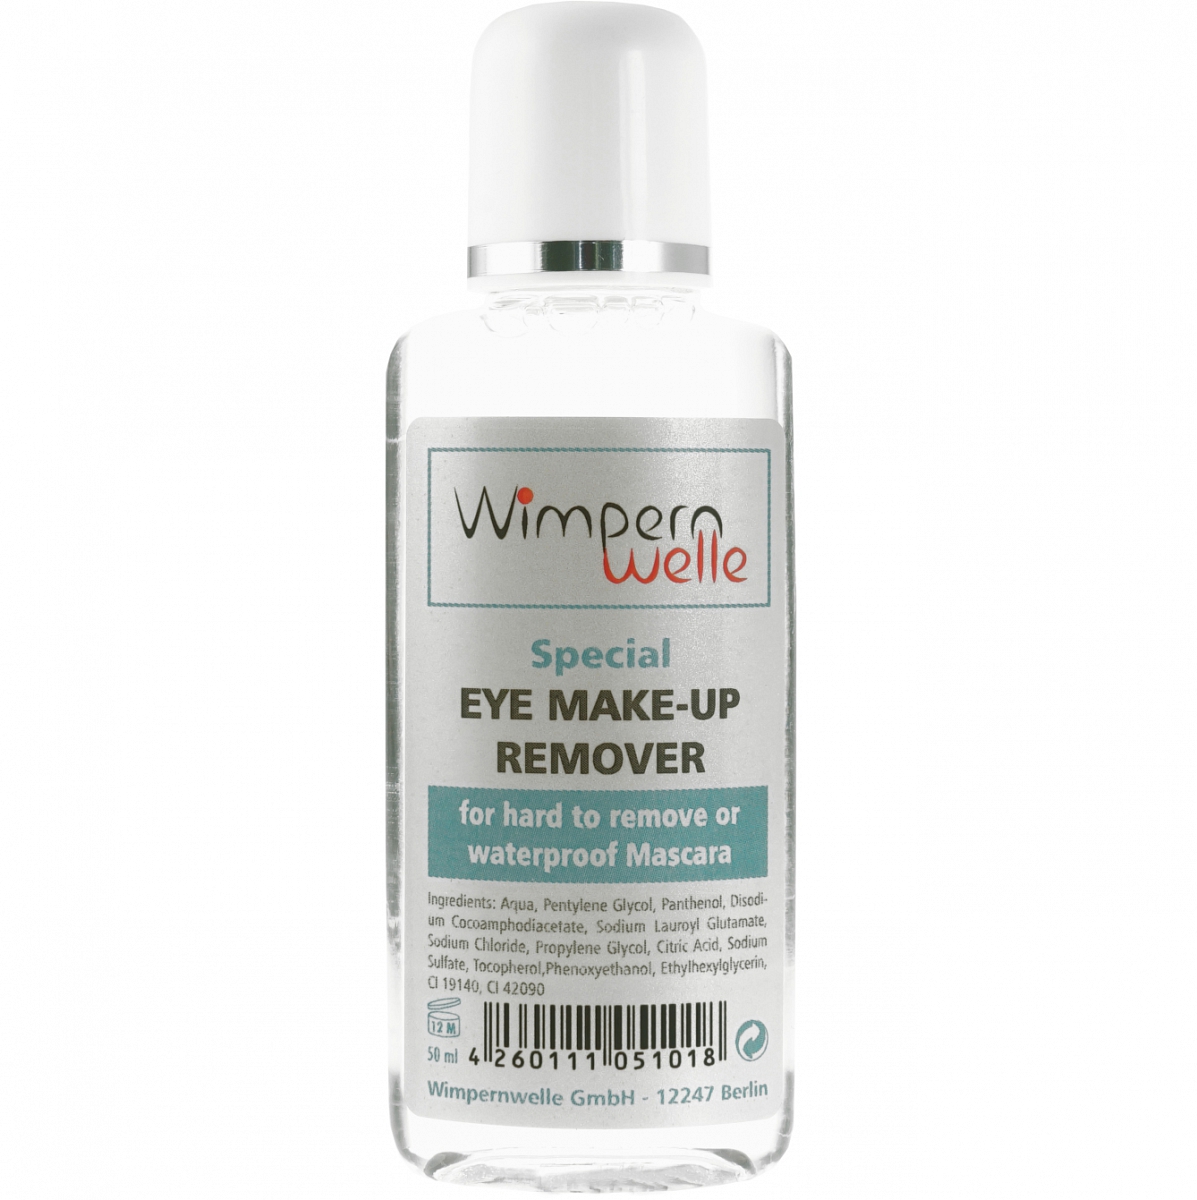 Special EYE MAKE-UP REMOVER